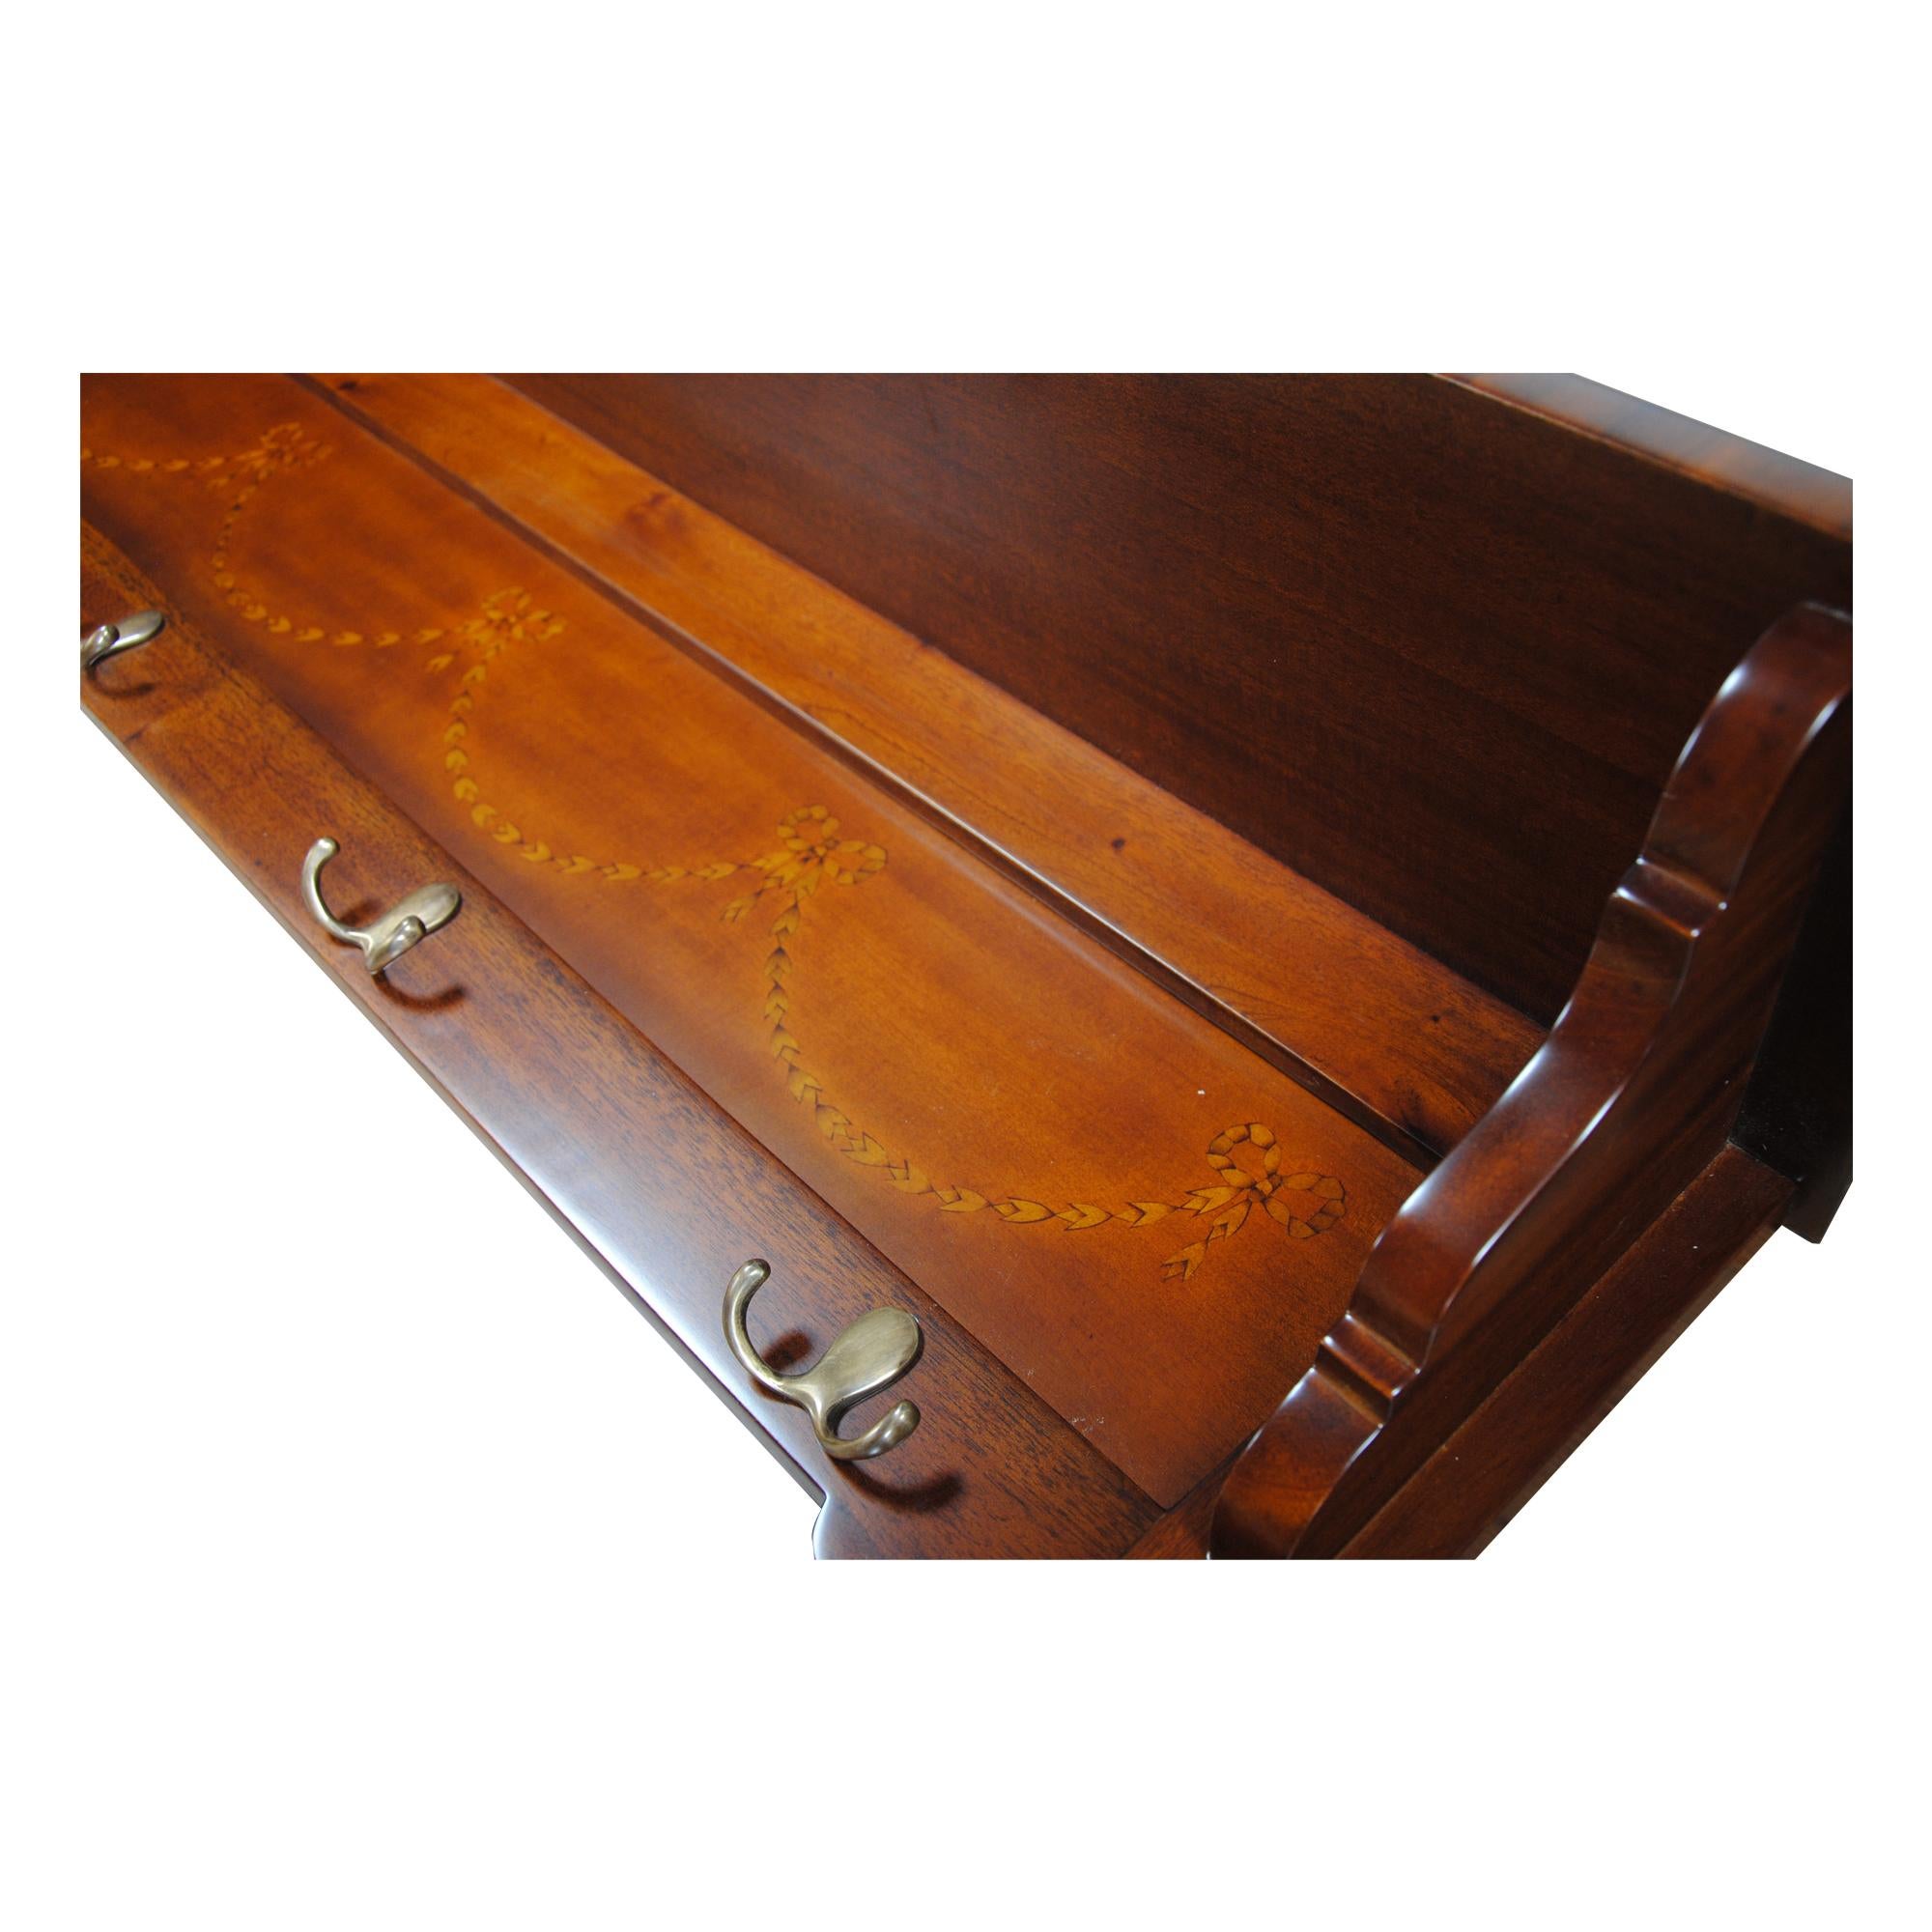 Mahogany Coat Rack Shelf In New Condition For Sale In Annville, PA